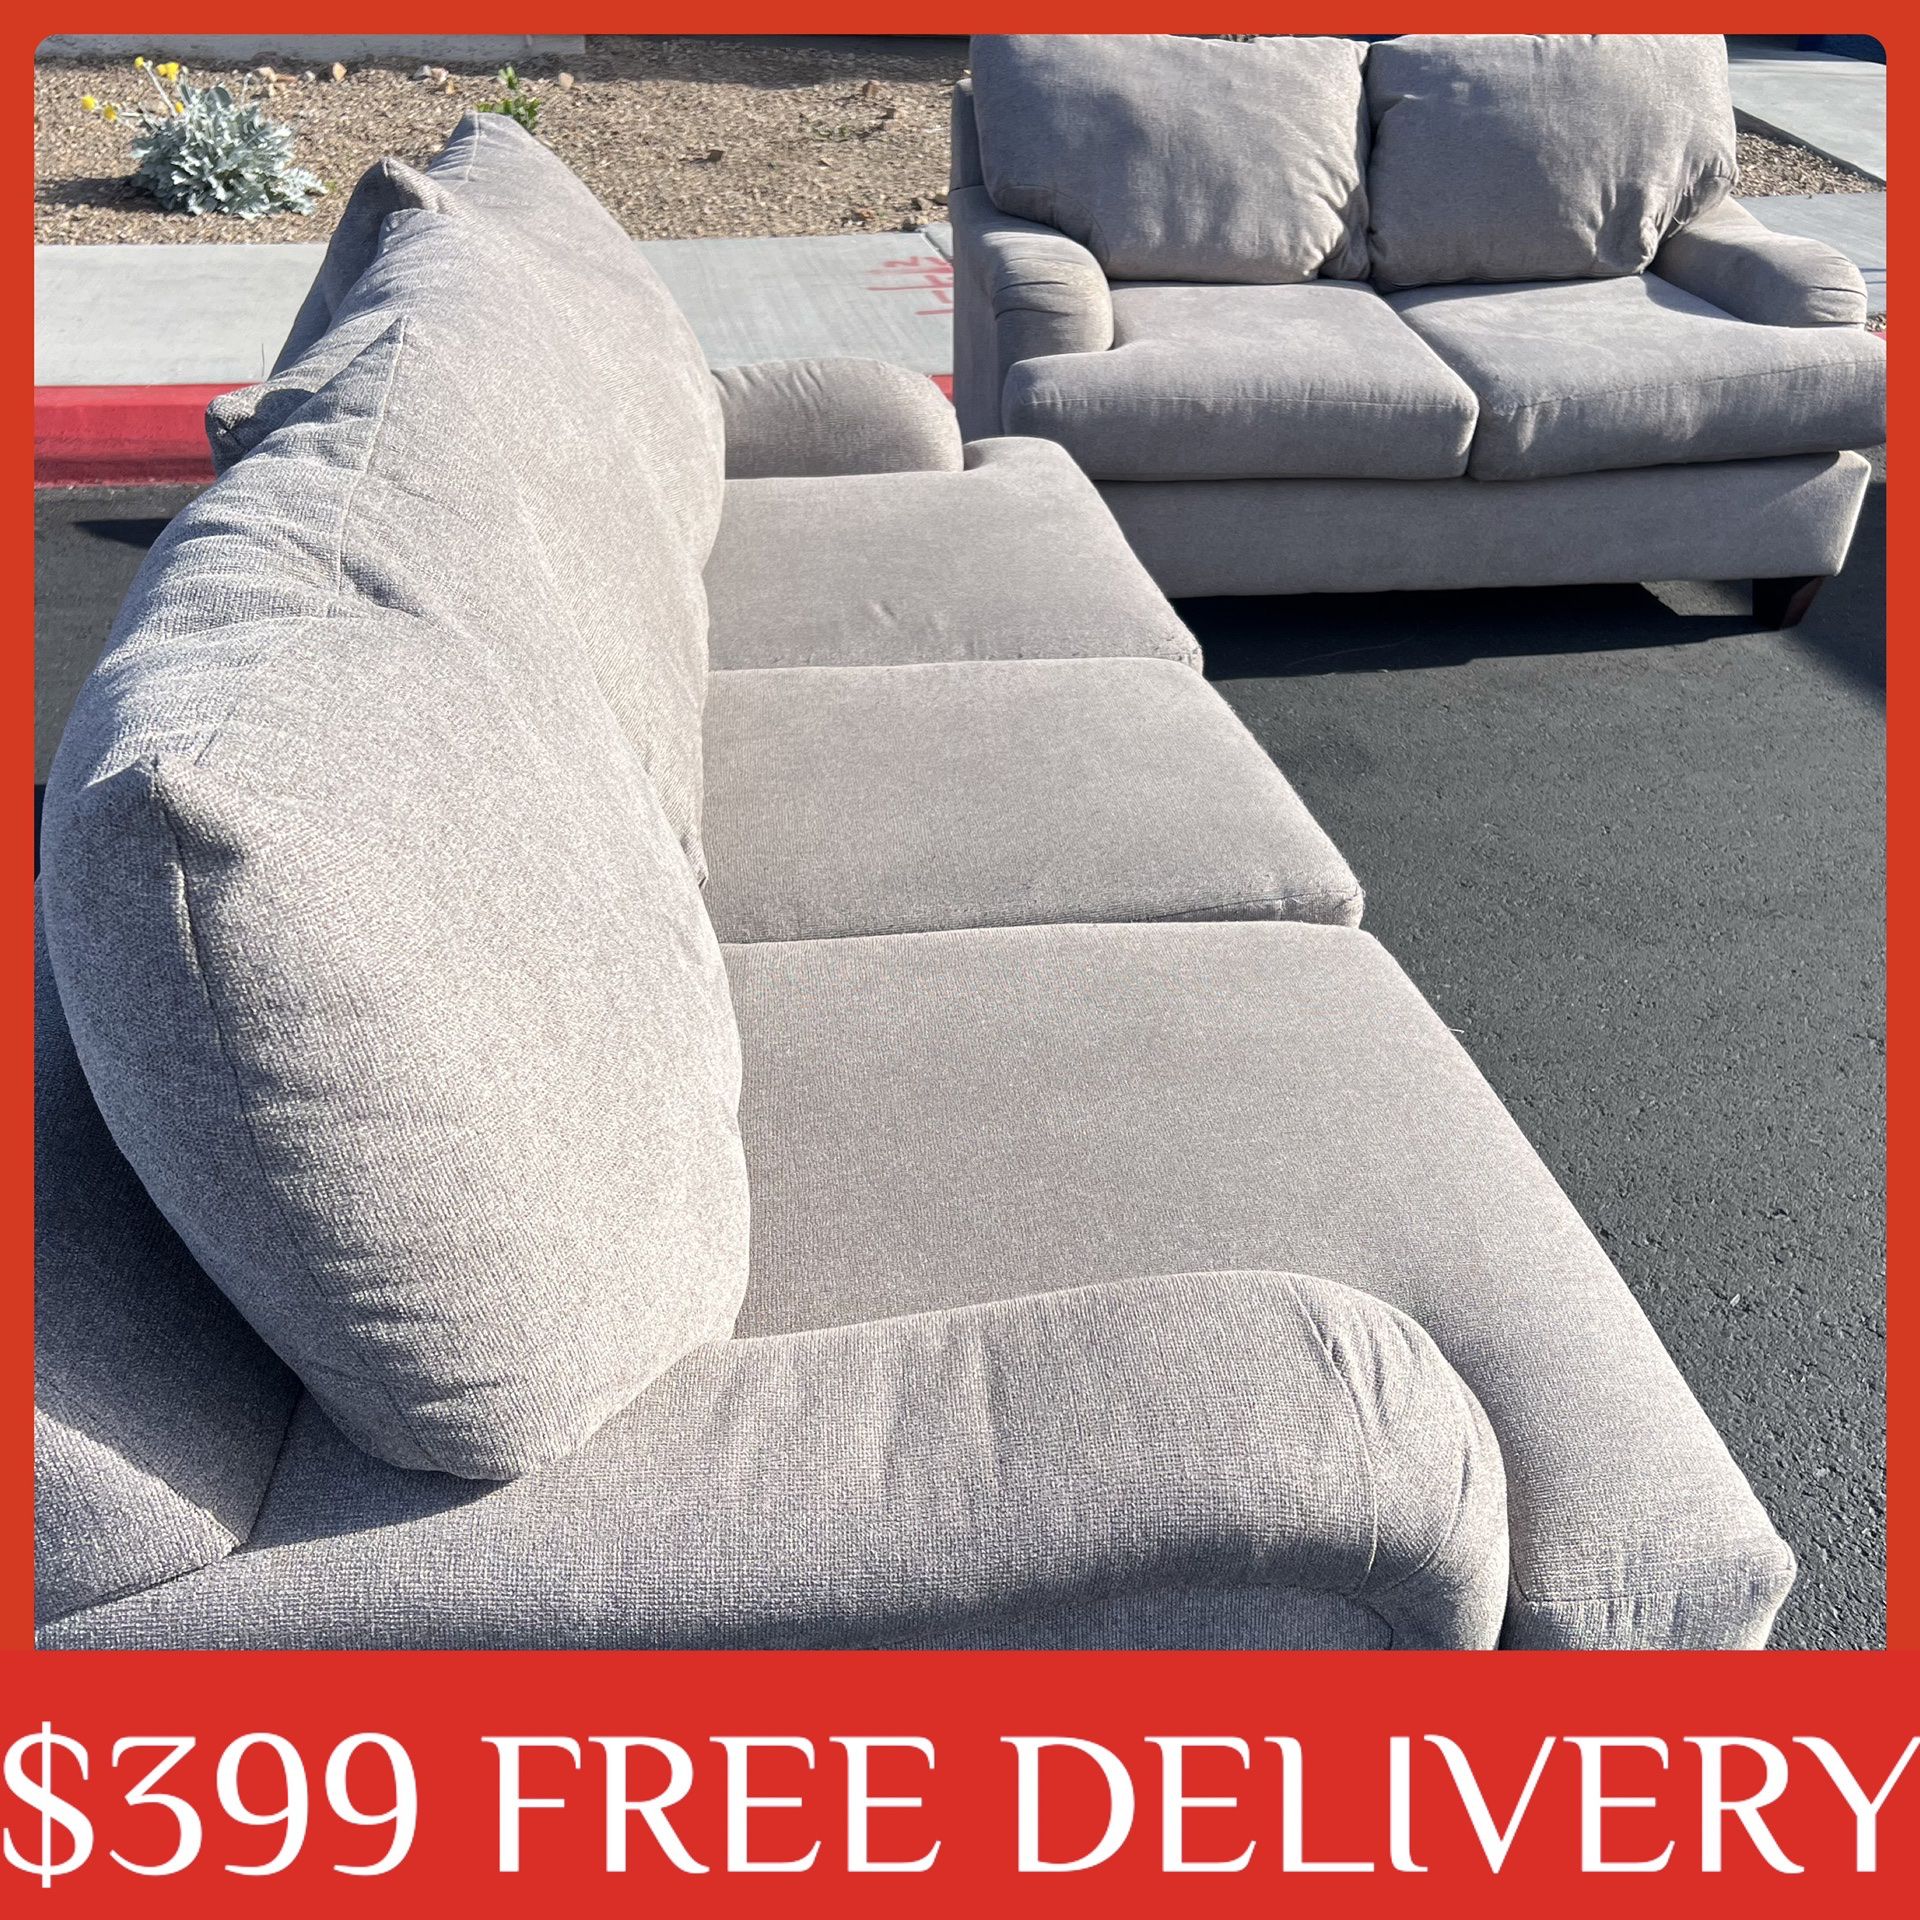 Light Gray Sofa and Loveseat COUCH SET sectional couch sofa recliner (FREE CURBSIDE DELIVERY)